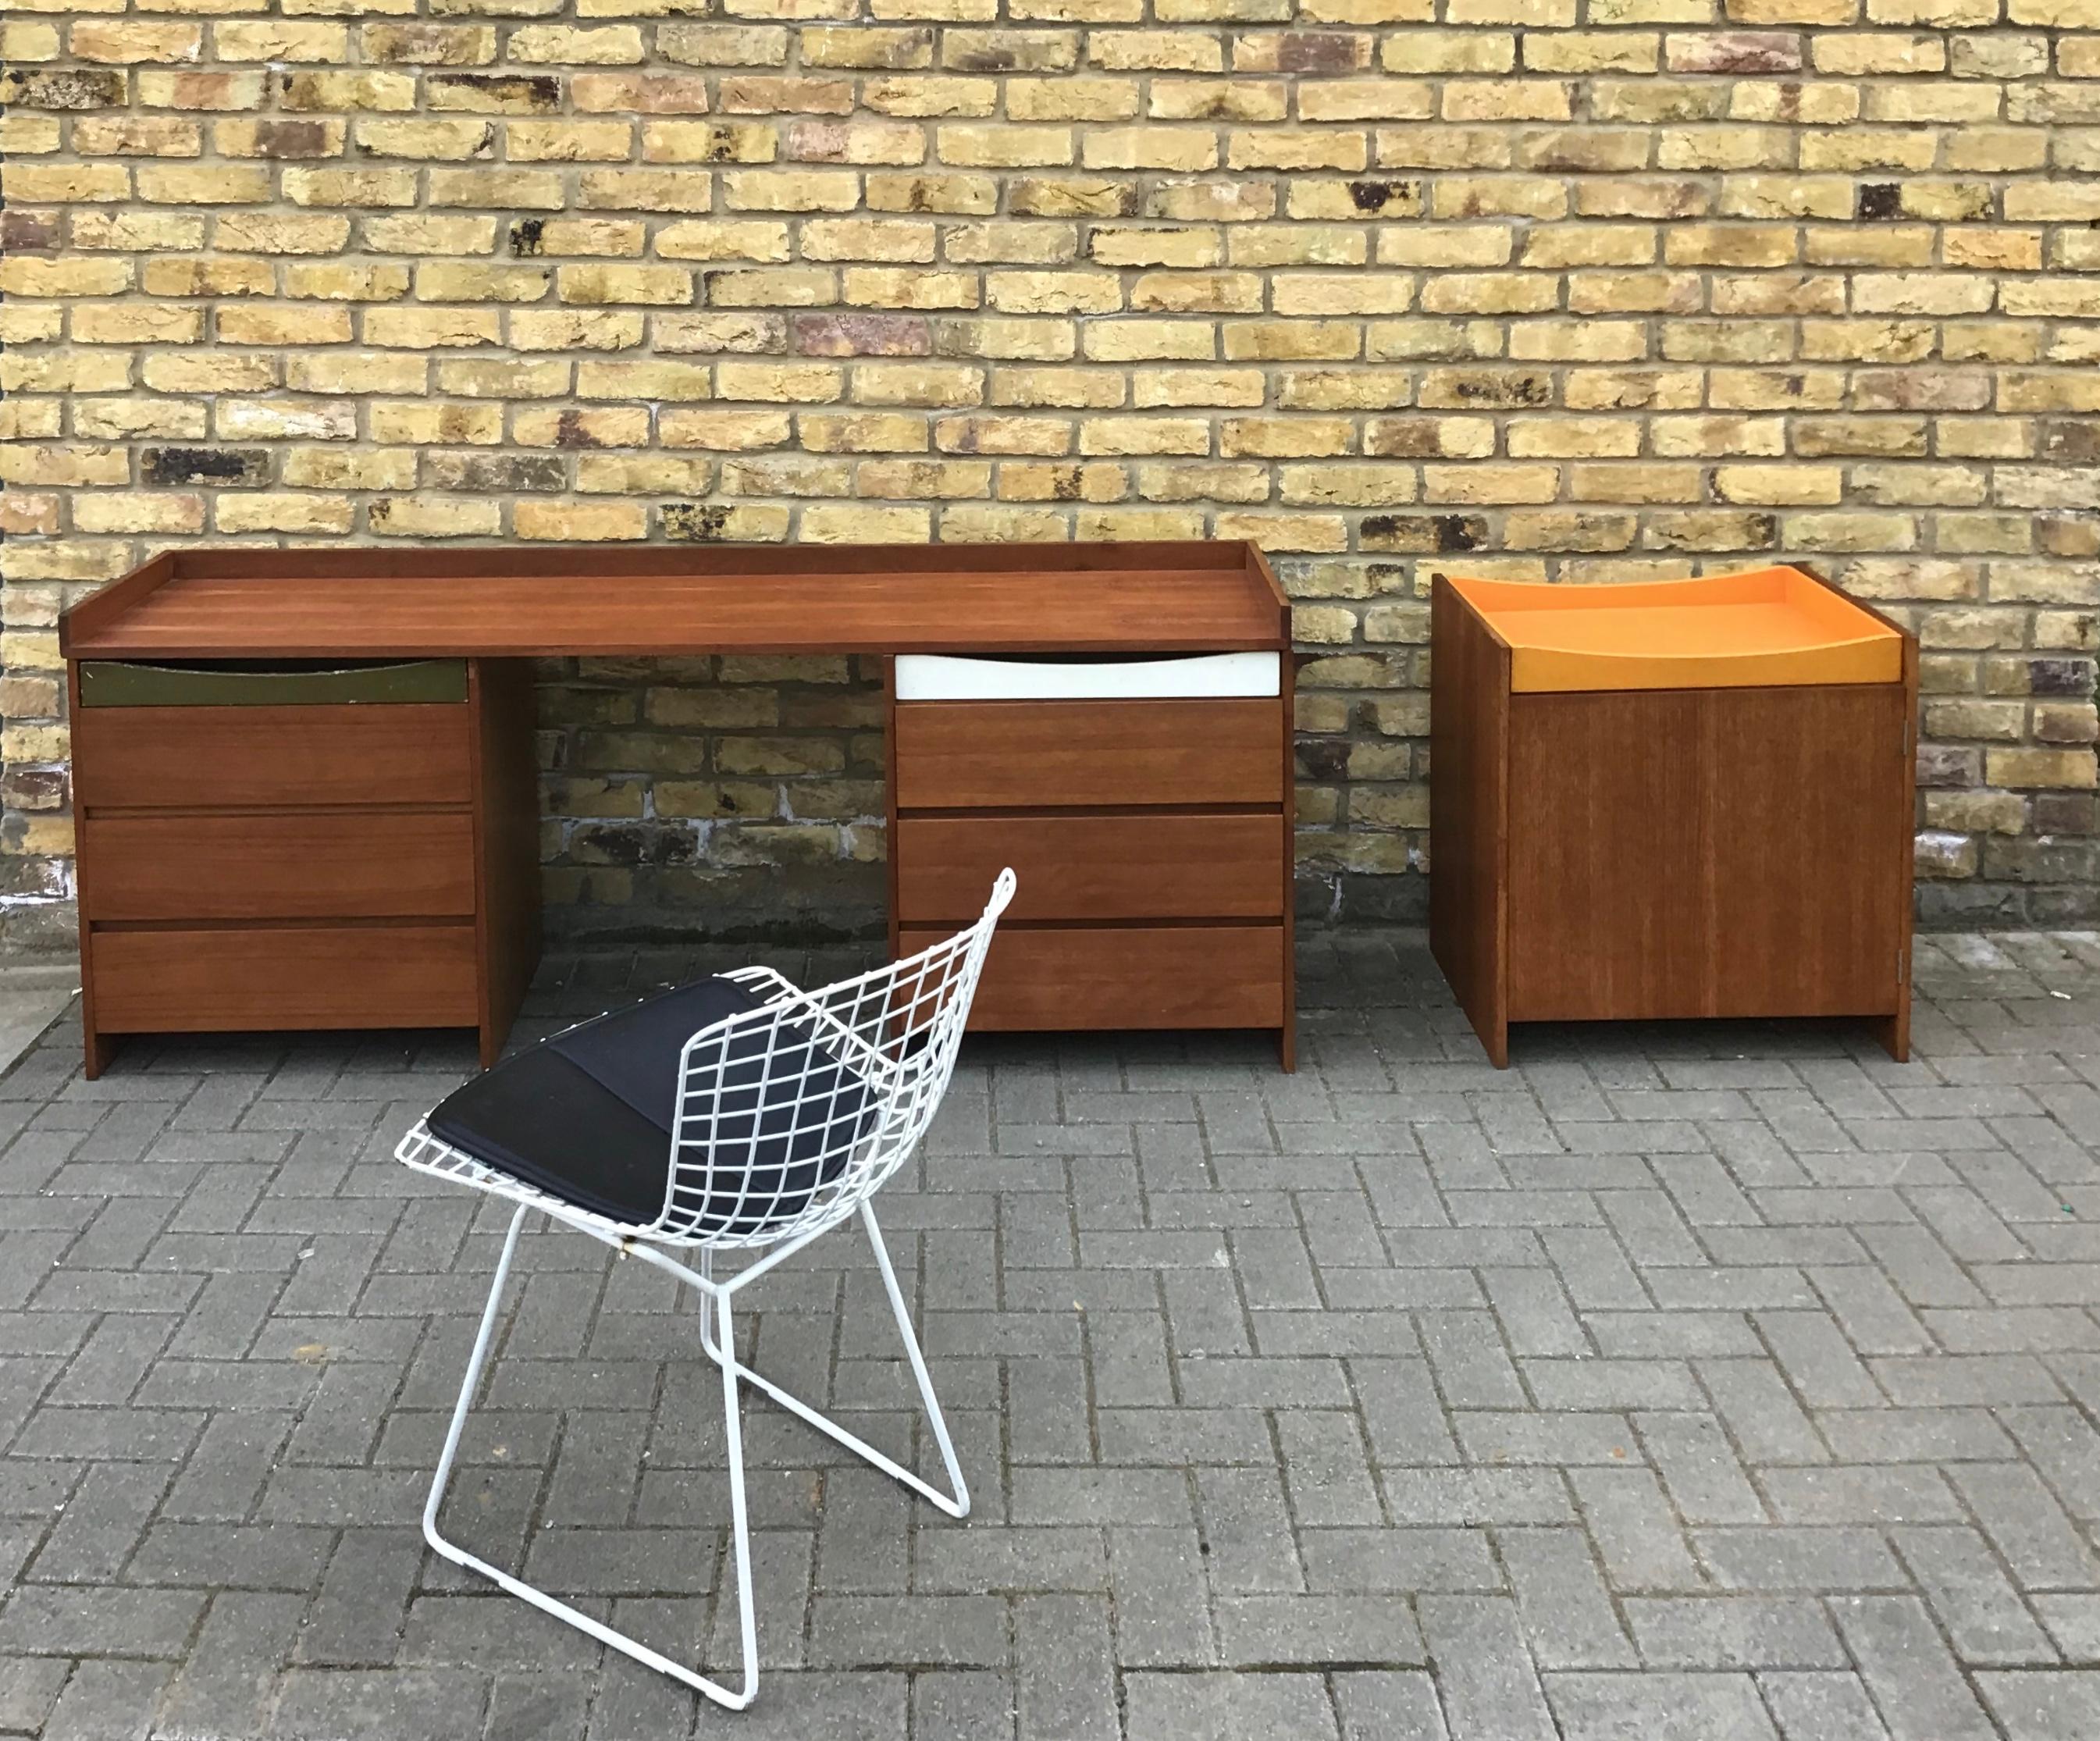 Rare
Modular storage units/desk interchangeable in teak including chest of draws and cabinet.
Designed by Sir Terence Conran circa 1960s Summa
Condition: Good but some age related wear.
     